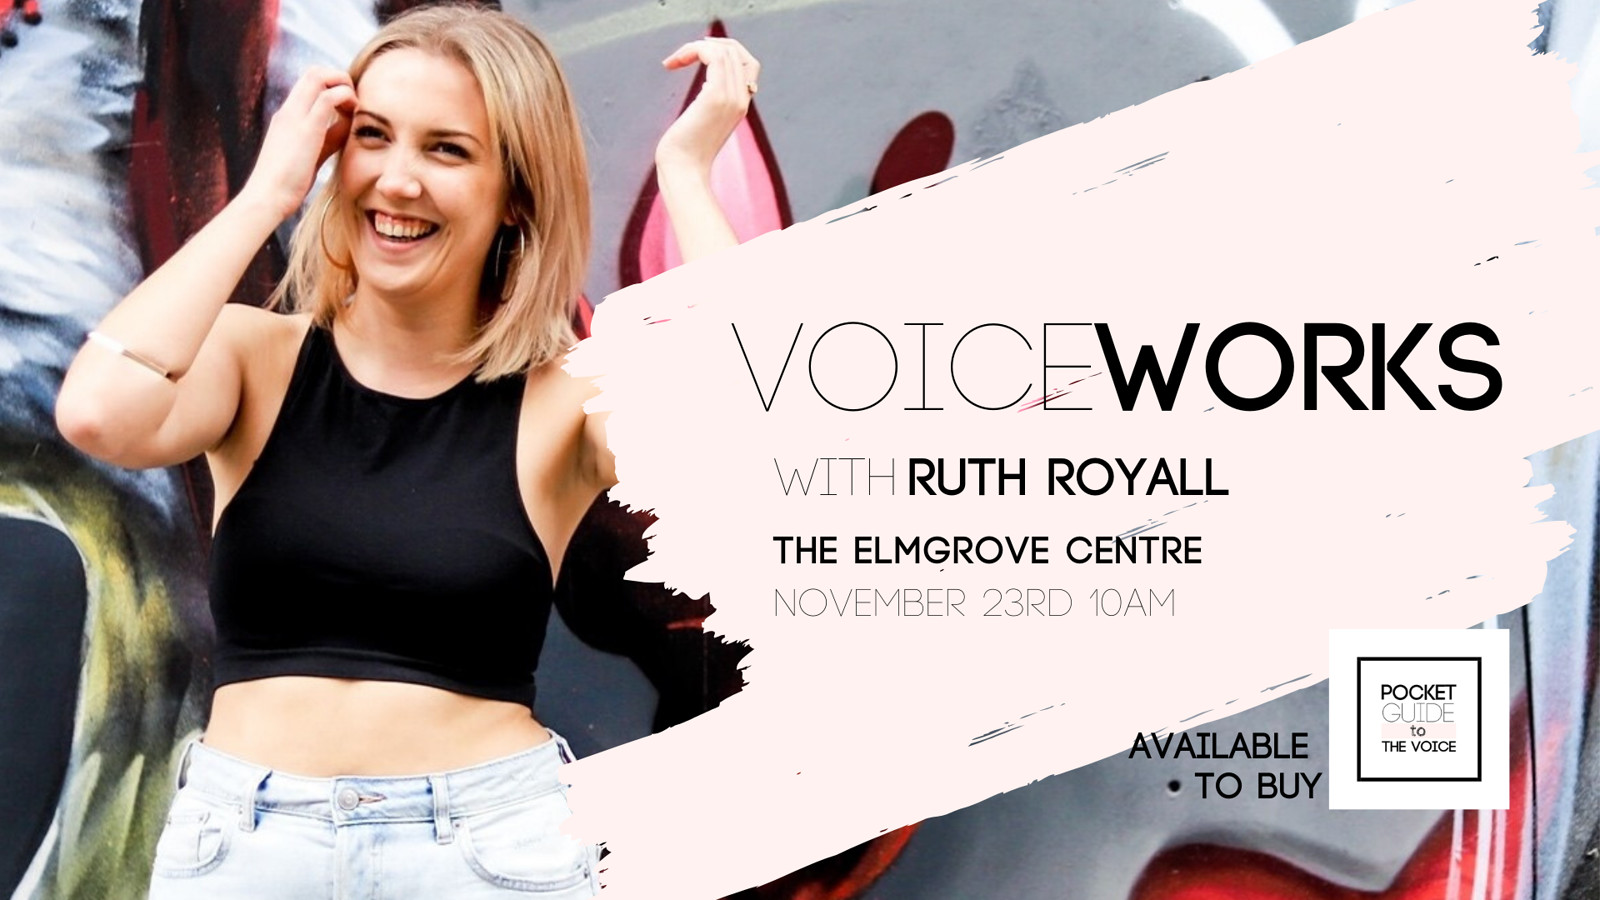 Voiceworks with Ruth Royall at The Elmgrove Centre